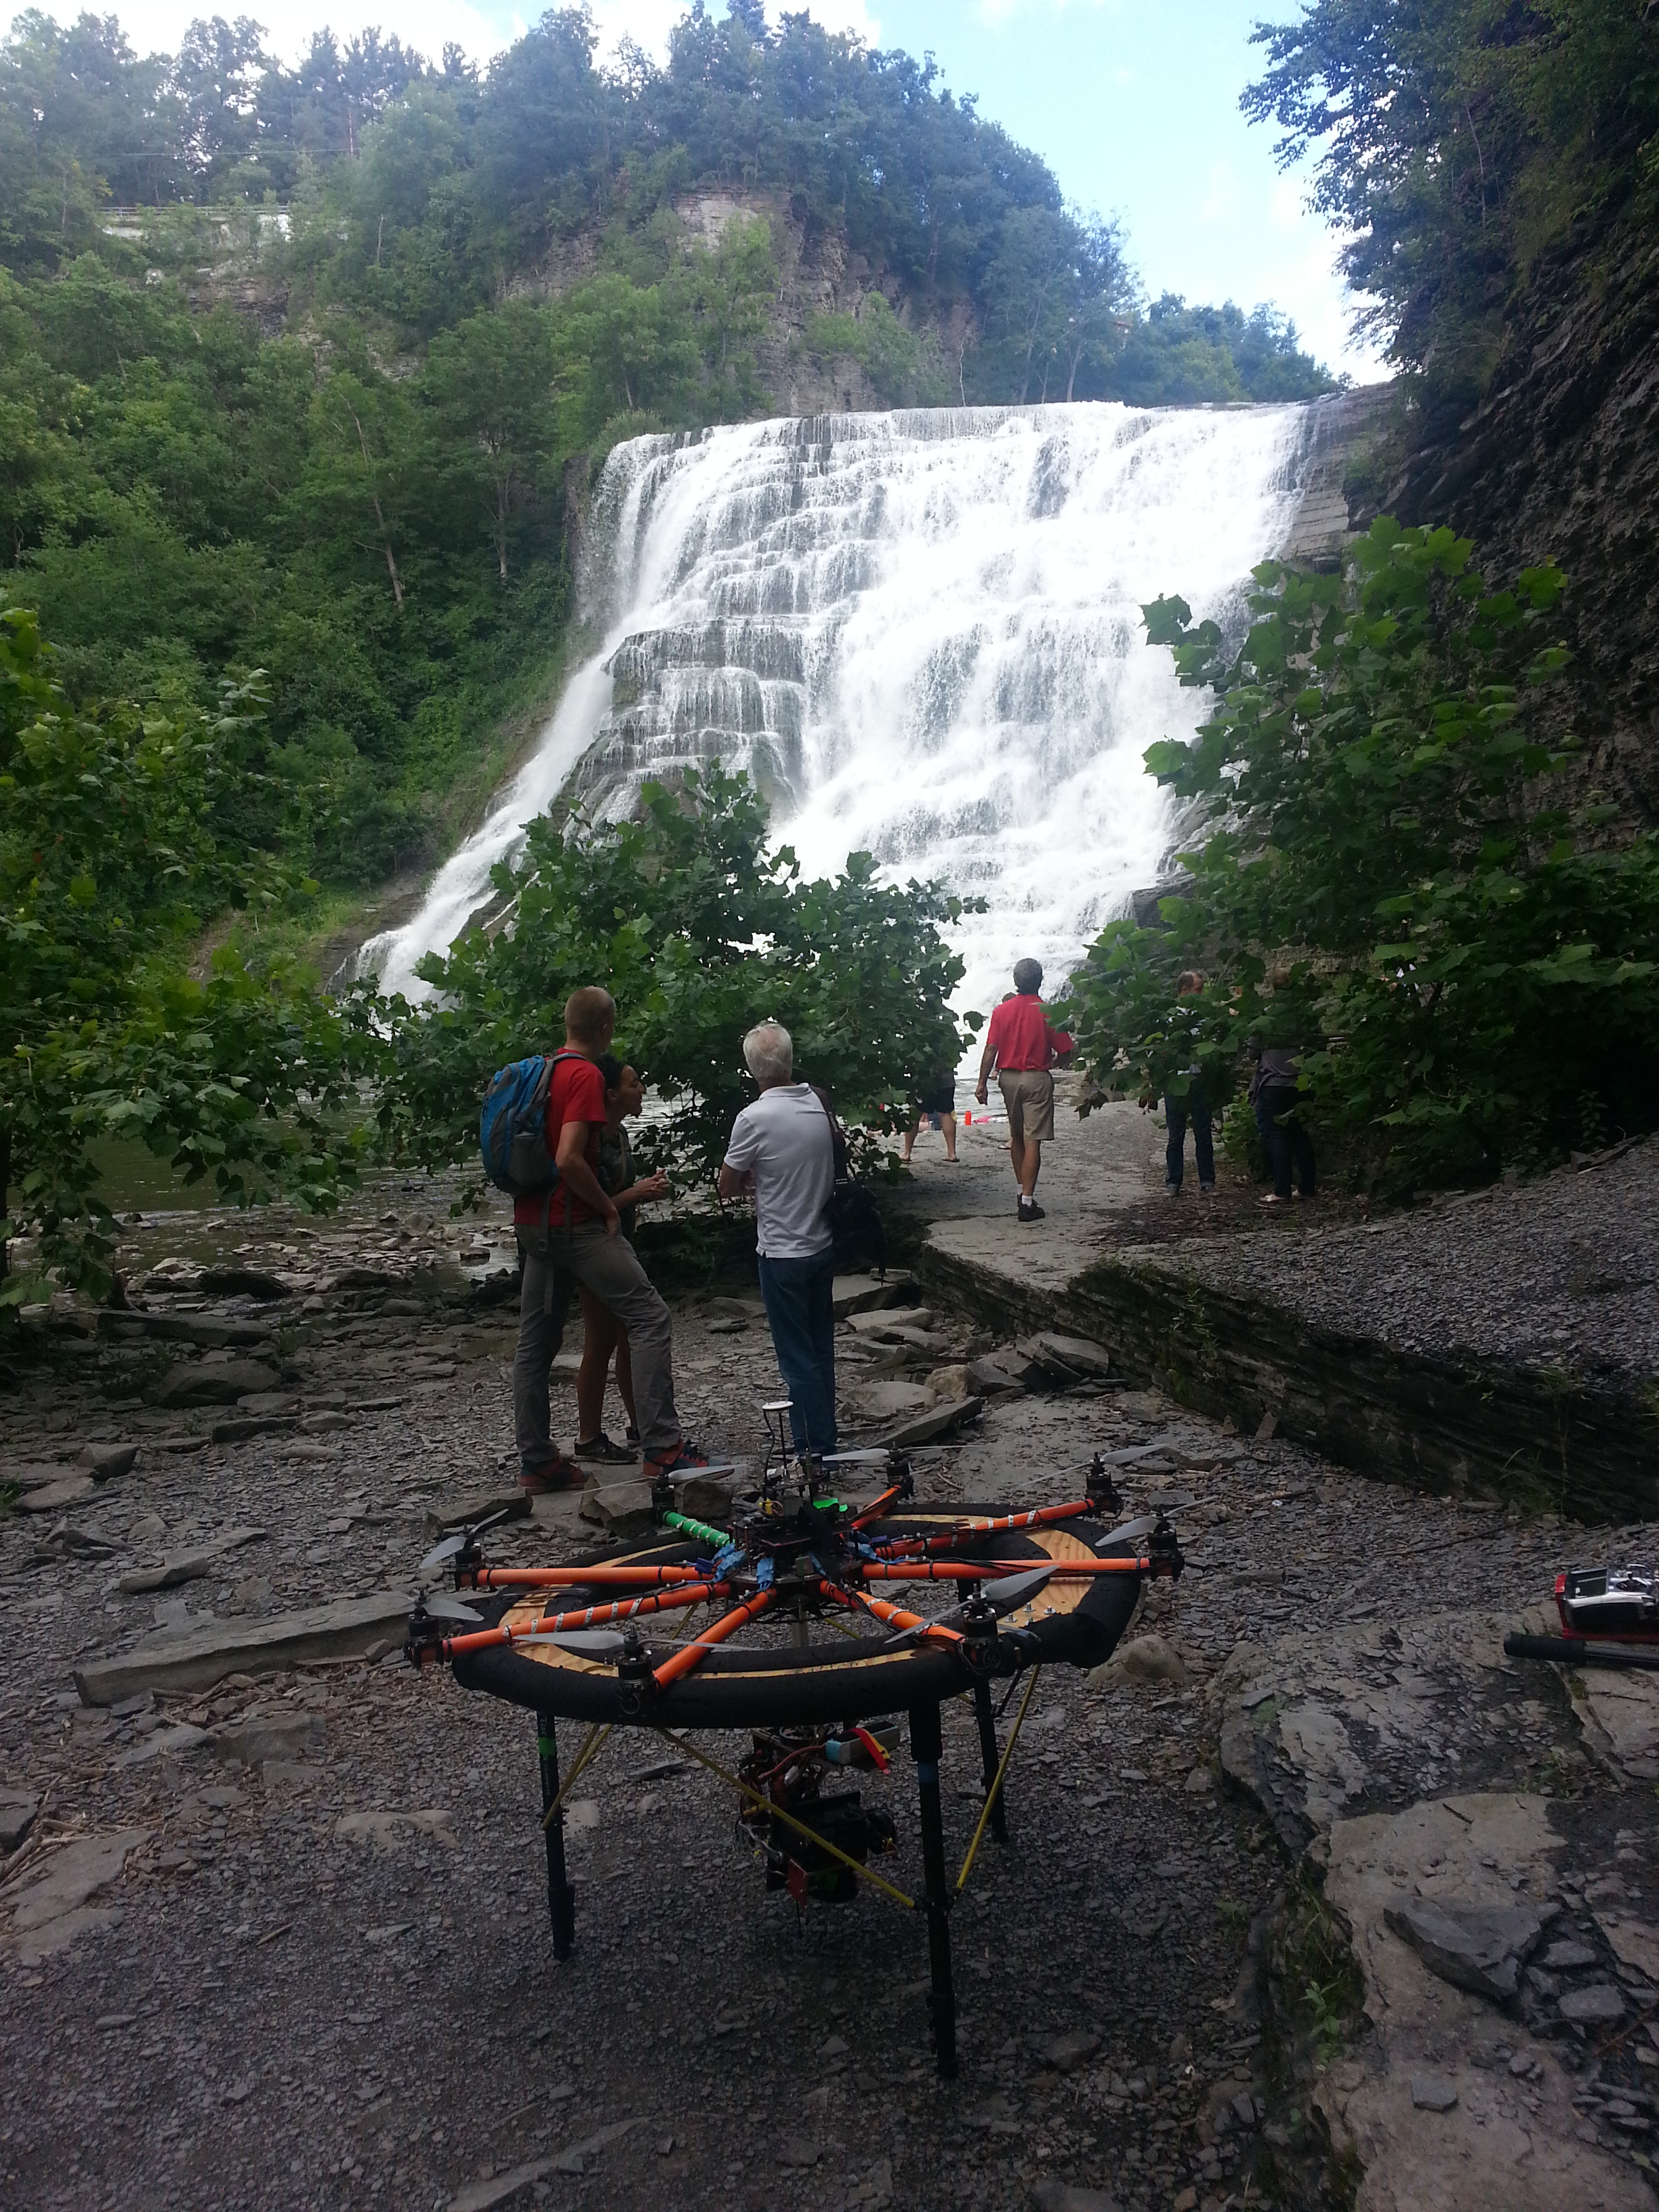 Downtown Ithica Waterfall shooting for the Great Cornell University